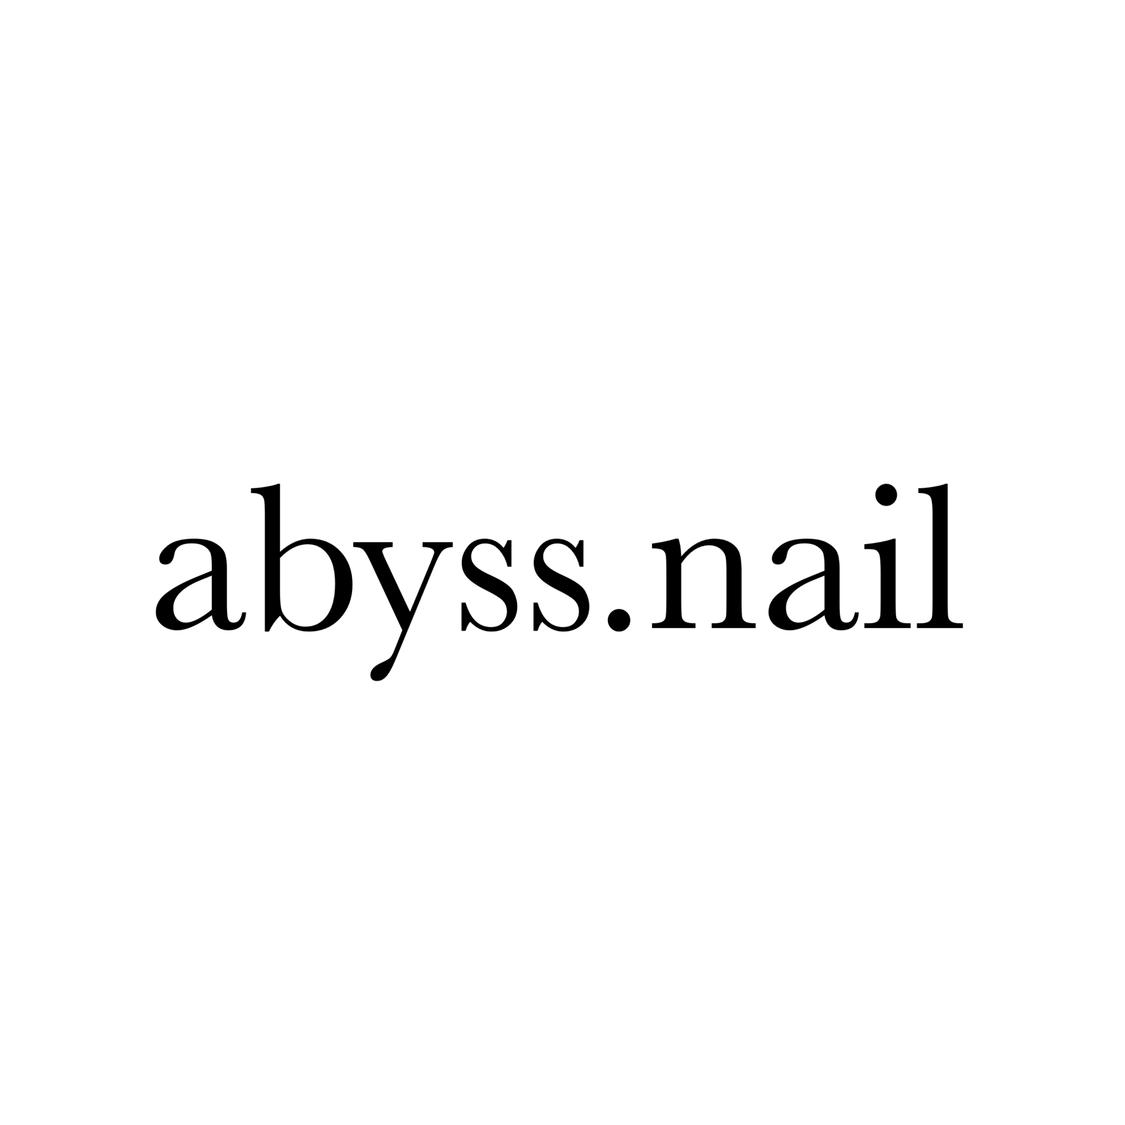 abyss.nailの画像